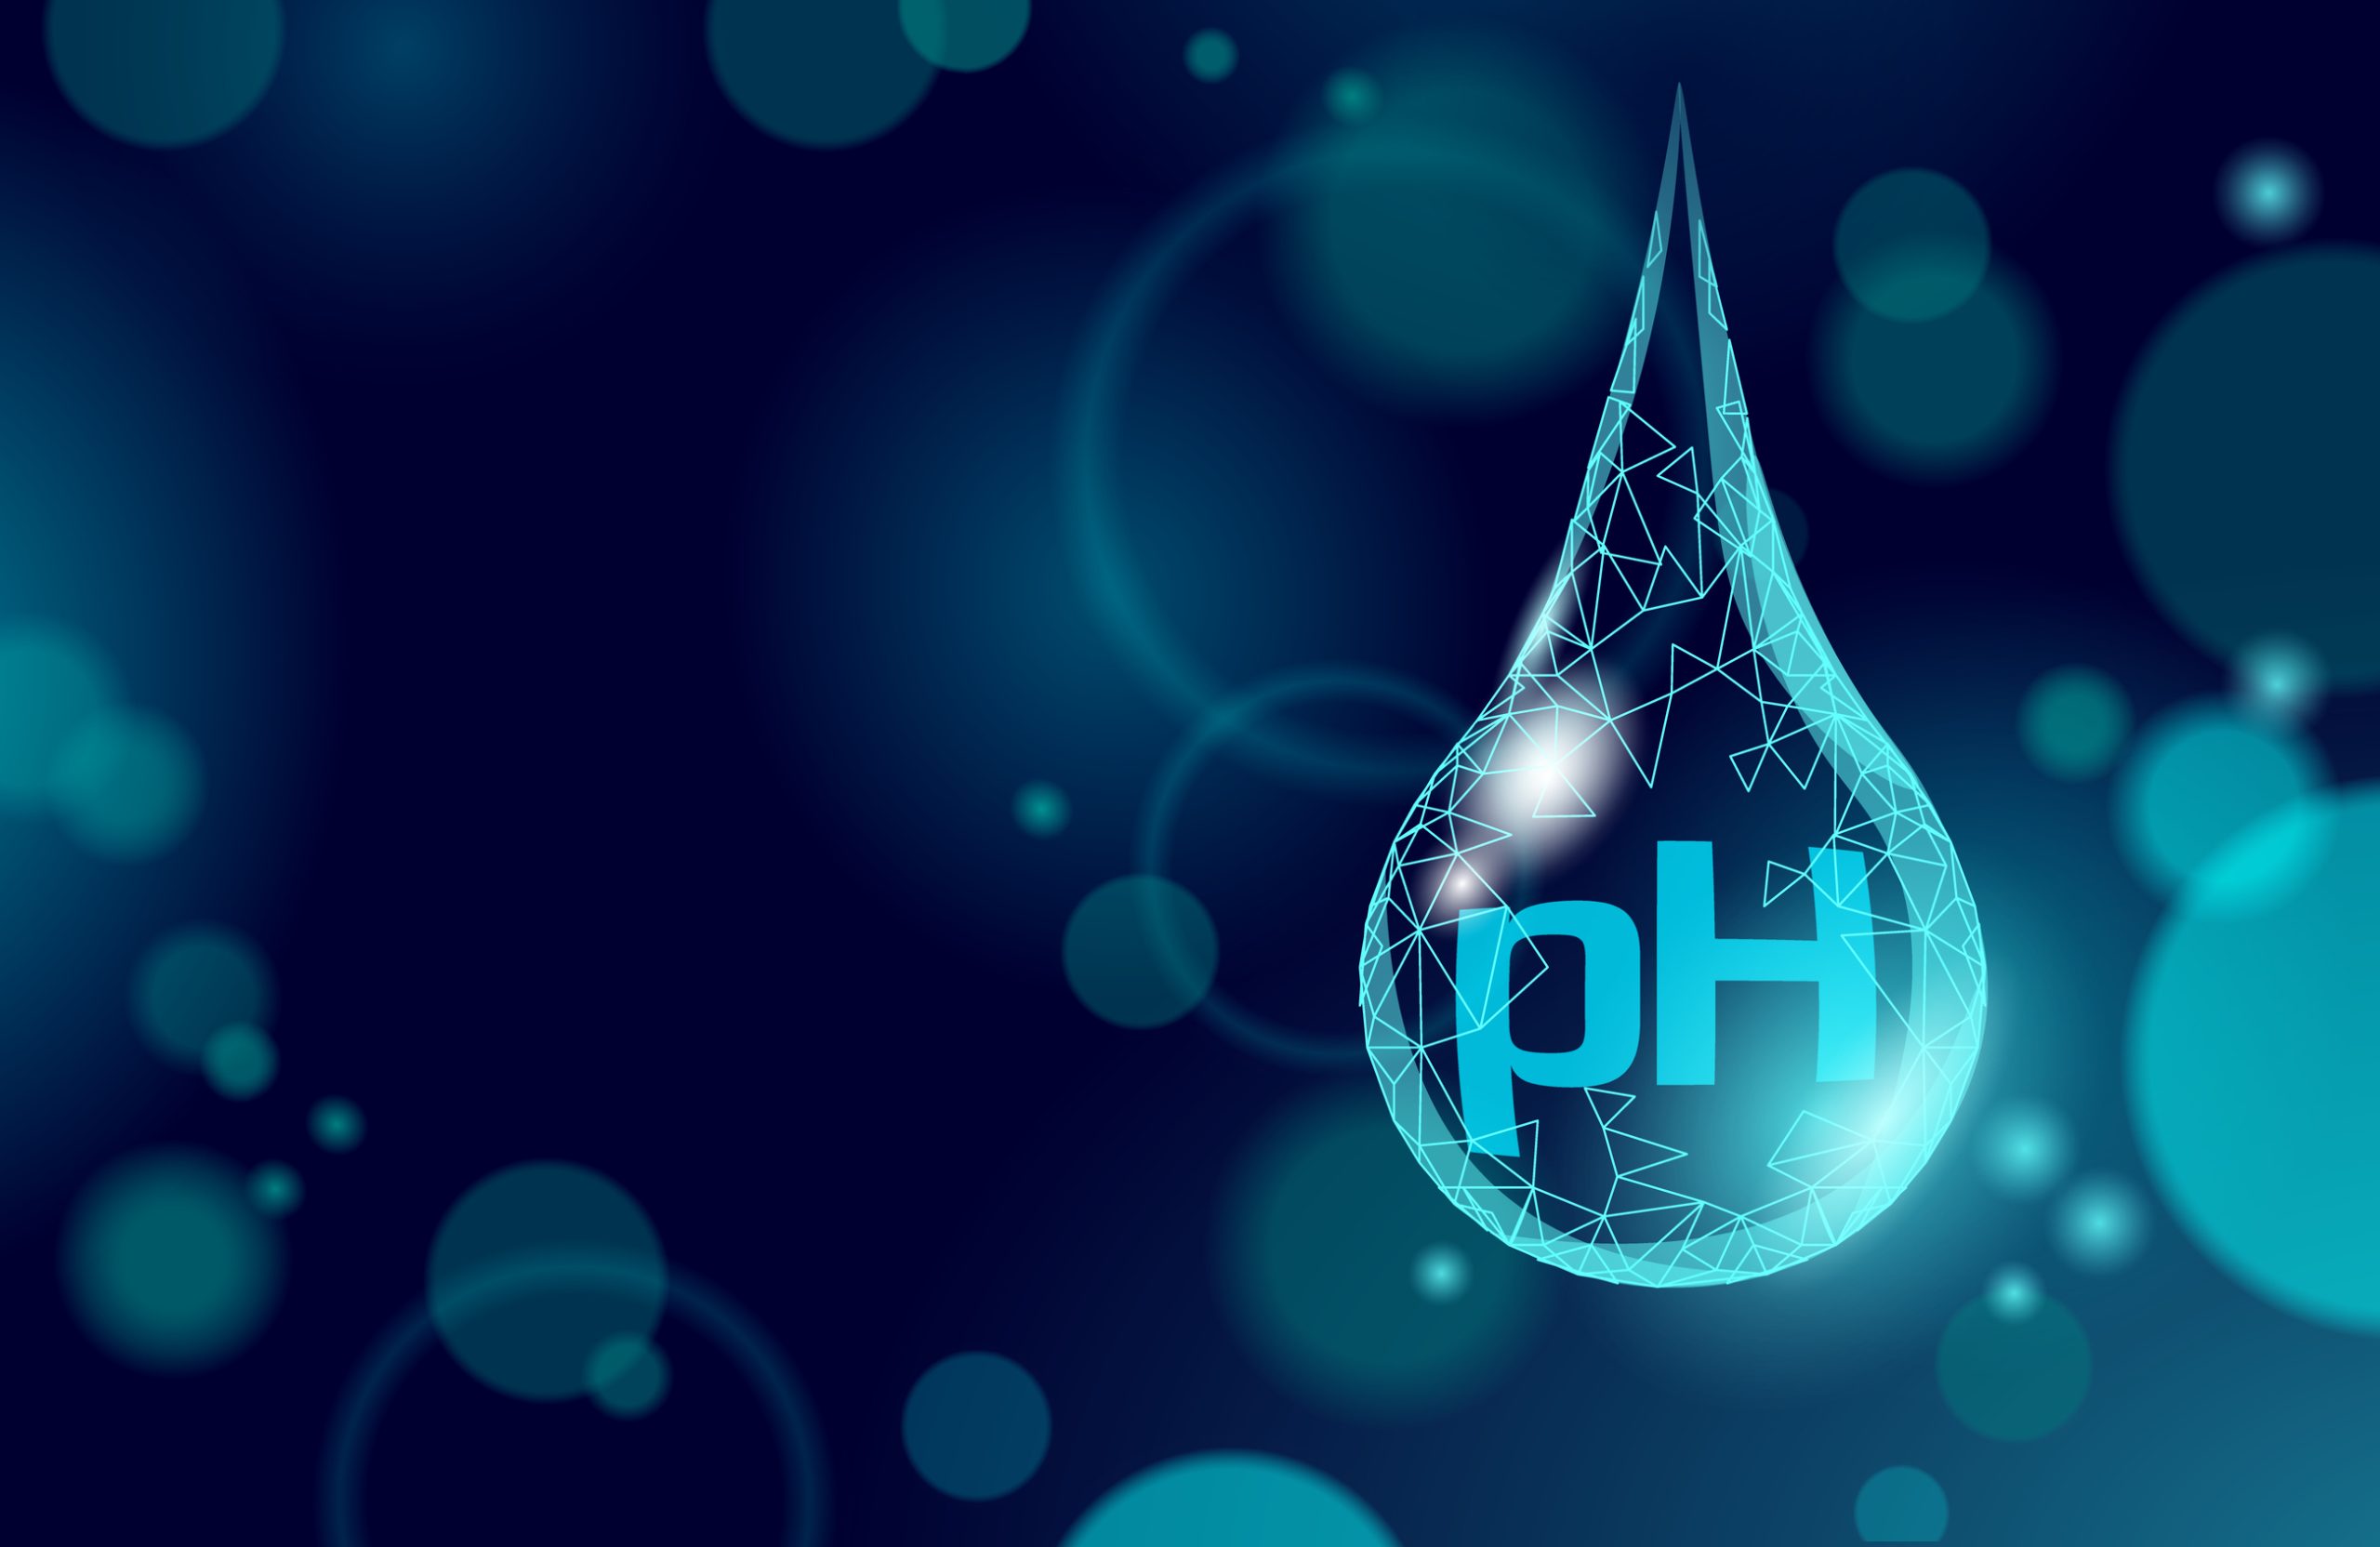 An image showing a digital representation of a large droplet of water with the letters pH inside of it.